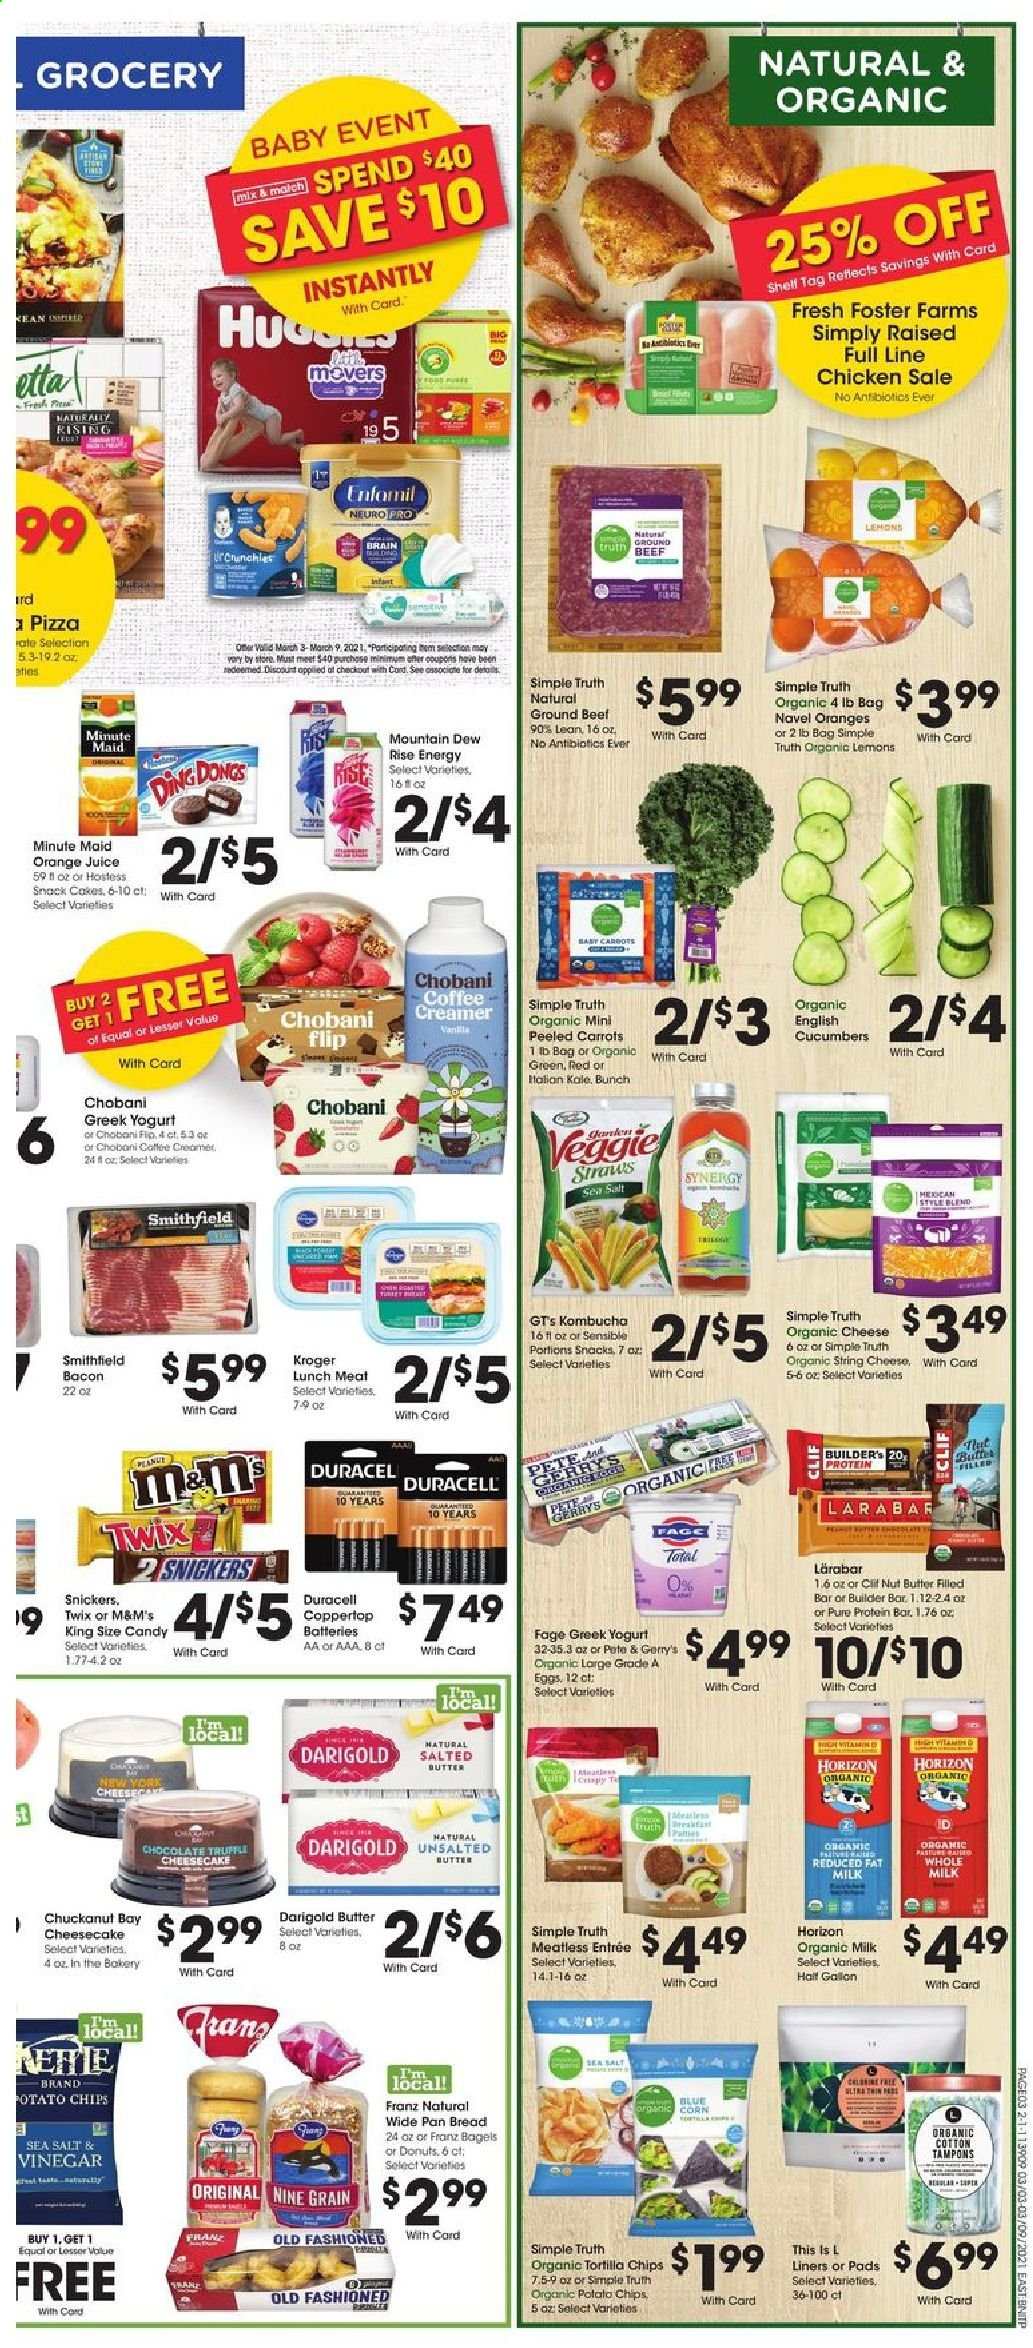 thumbnail - Fred Meyer Flyer - 03/03/2021 - 03/09/2021 - Sales products - bread, bagels, cheesecake, cake, donut, pizza, bacon, lunch meat, string cheese, cheese, greek yoghurt, yoghurt, Chobani, organic milk, eggs, salted butter, creamer, coffee and tea creamer, carrots, corn, chocolate, Snickers, Twix, truffles, M&M's, tortilla chips, potato chips, chips, snack, sea salt, cucumber, protein bar, nut butter, Mountain Dew, orange juice, juice, kombucha, beef meat, ground beef, tampons, pan, battery, Duracell. Page 3.